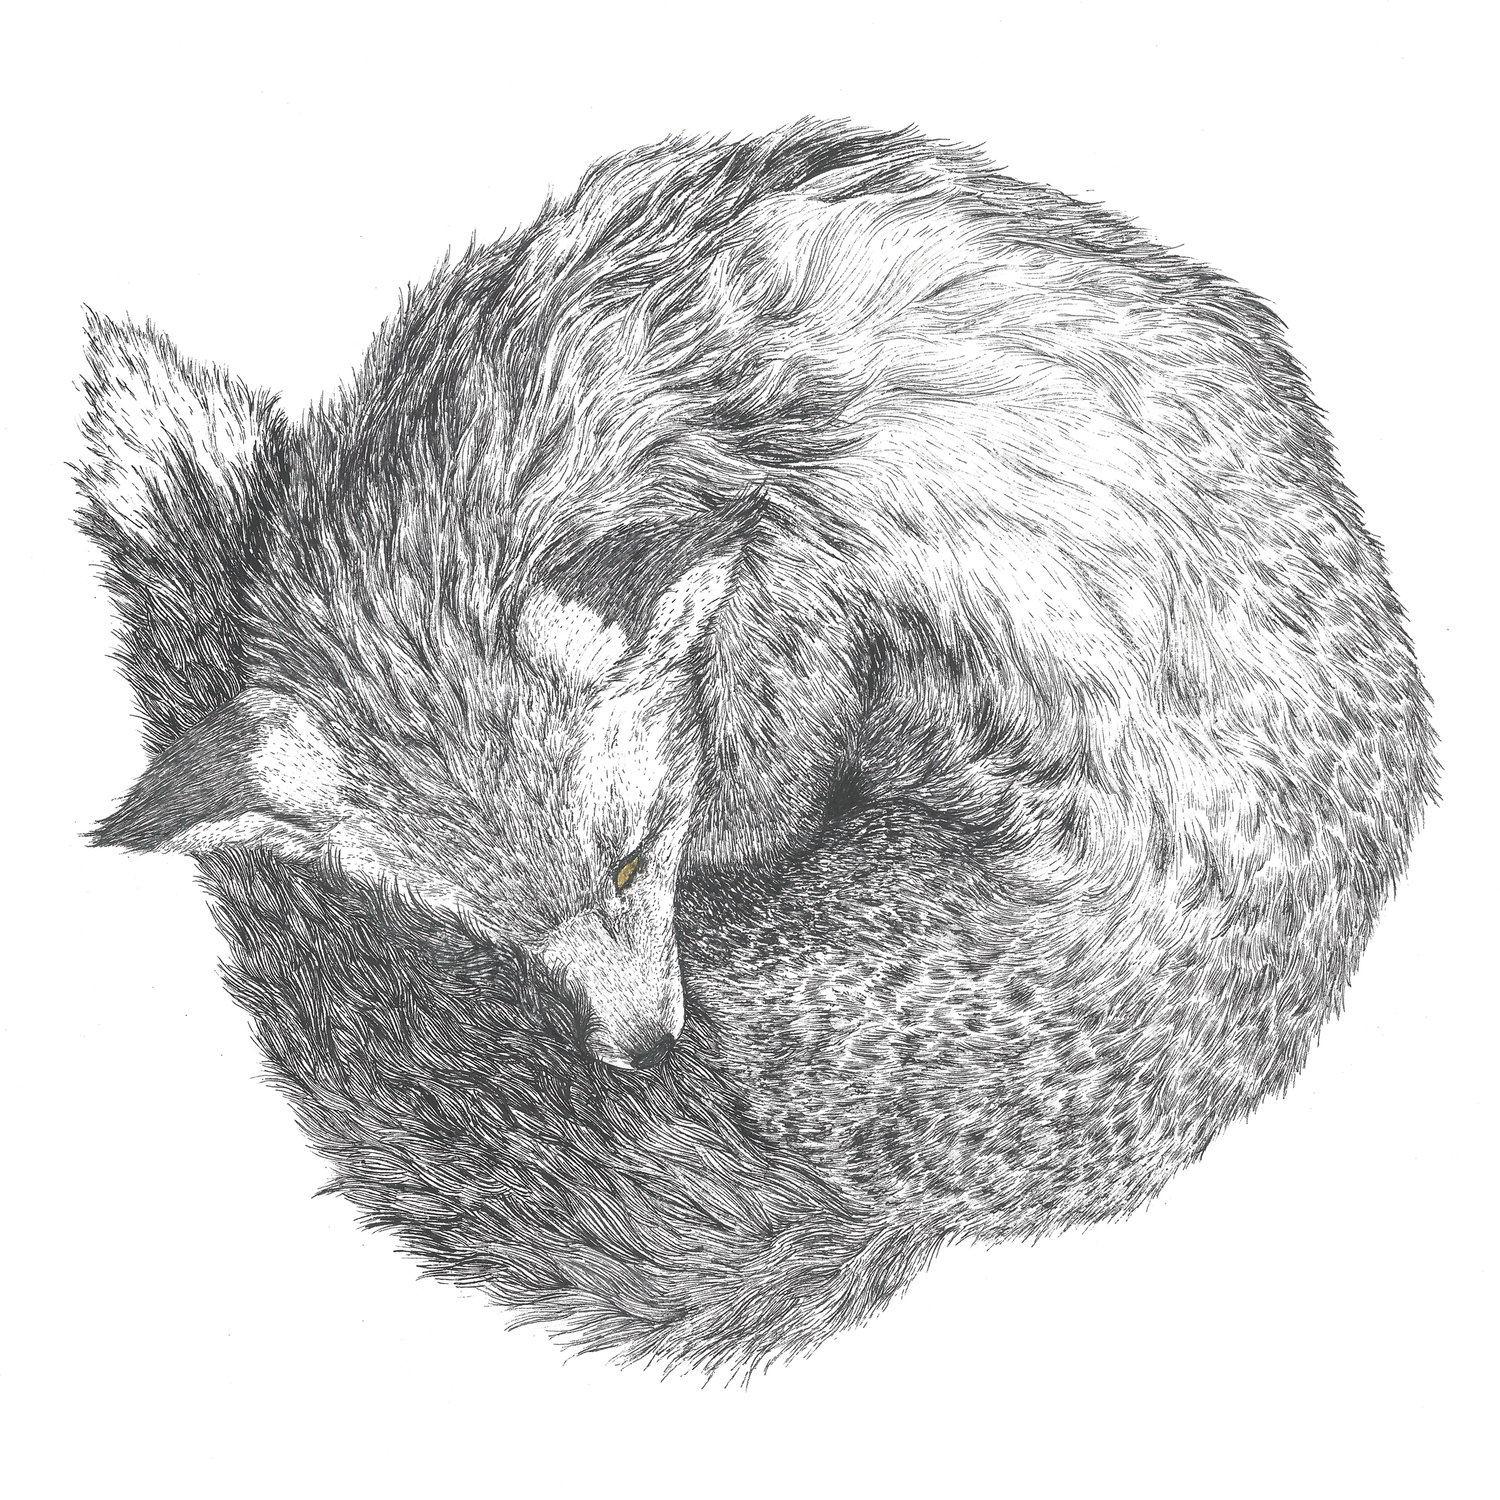 drawing of a curled up fox